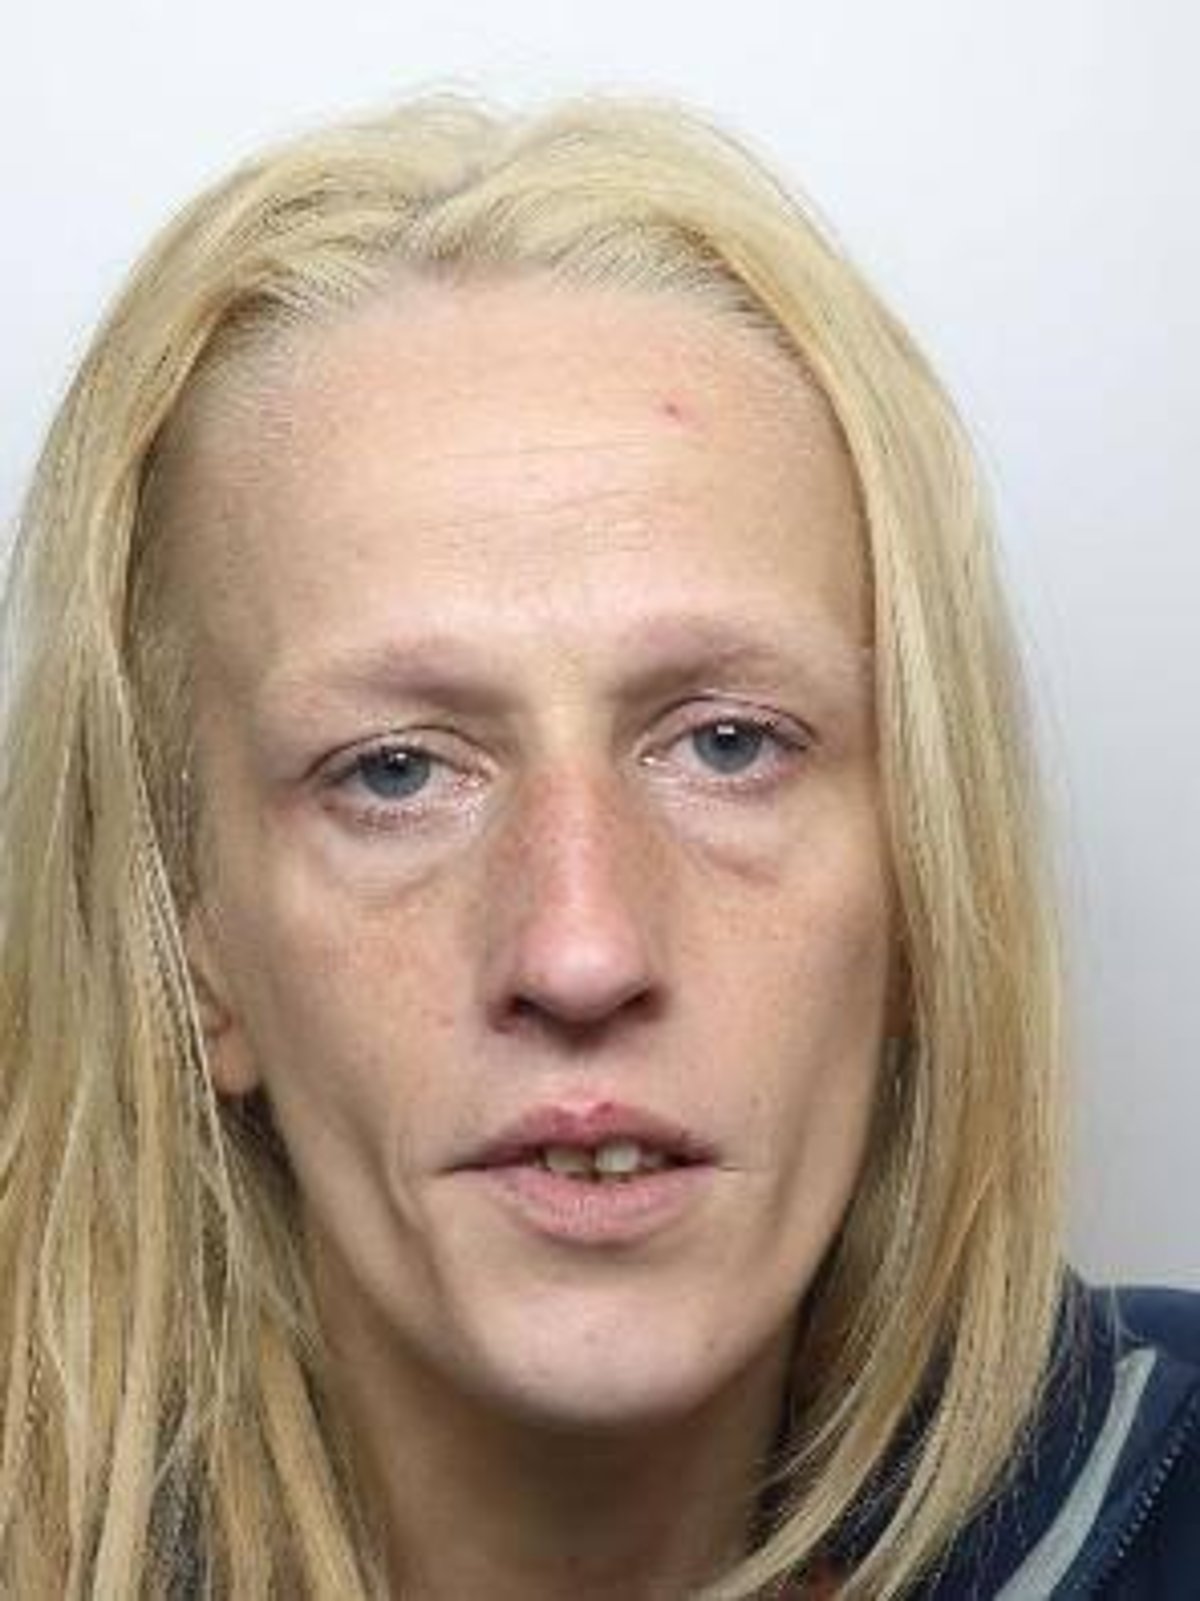 Serial Thief Jailed After Stealing More Than £200 Worth Of Goods Within A Few Minutes The Star